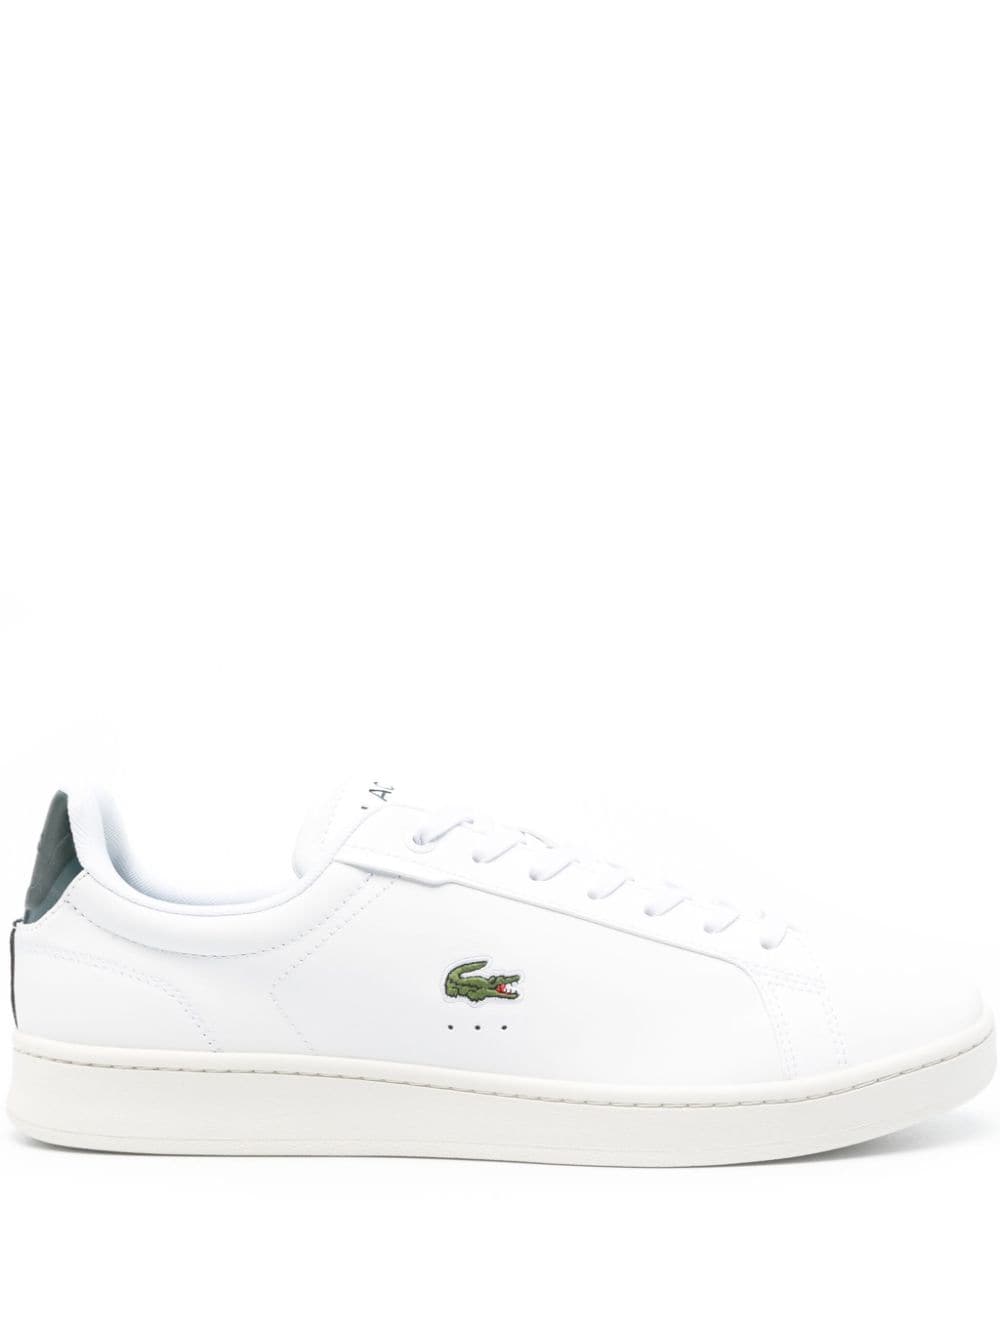 Carnaby Pro Premium leather sneakers<BR/>